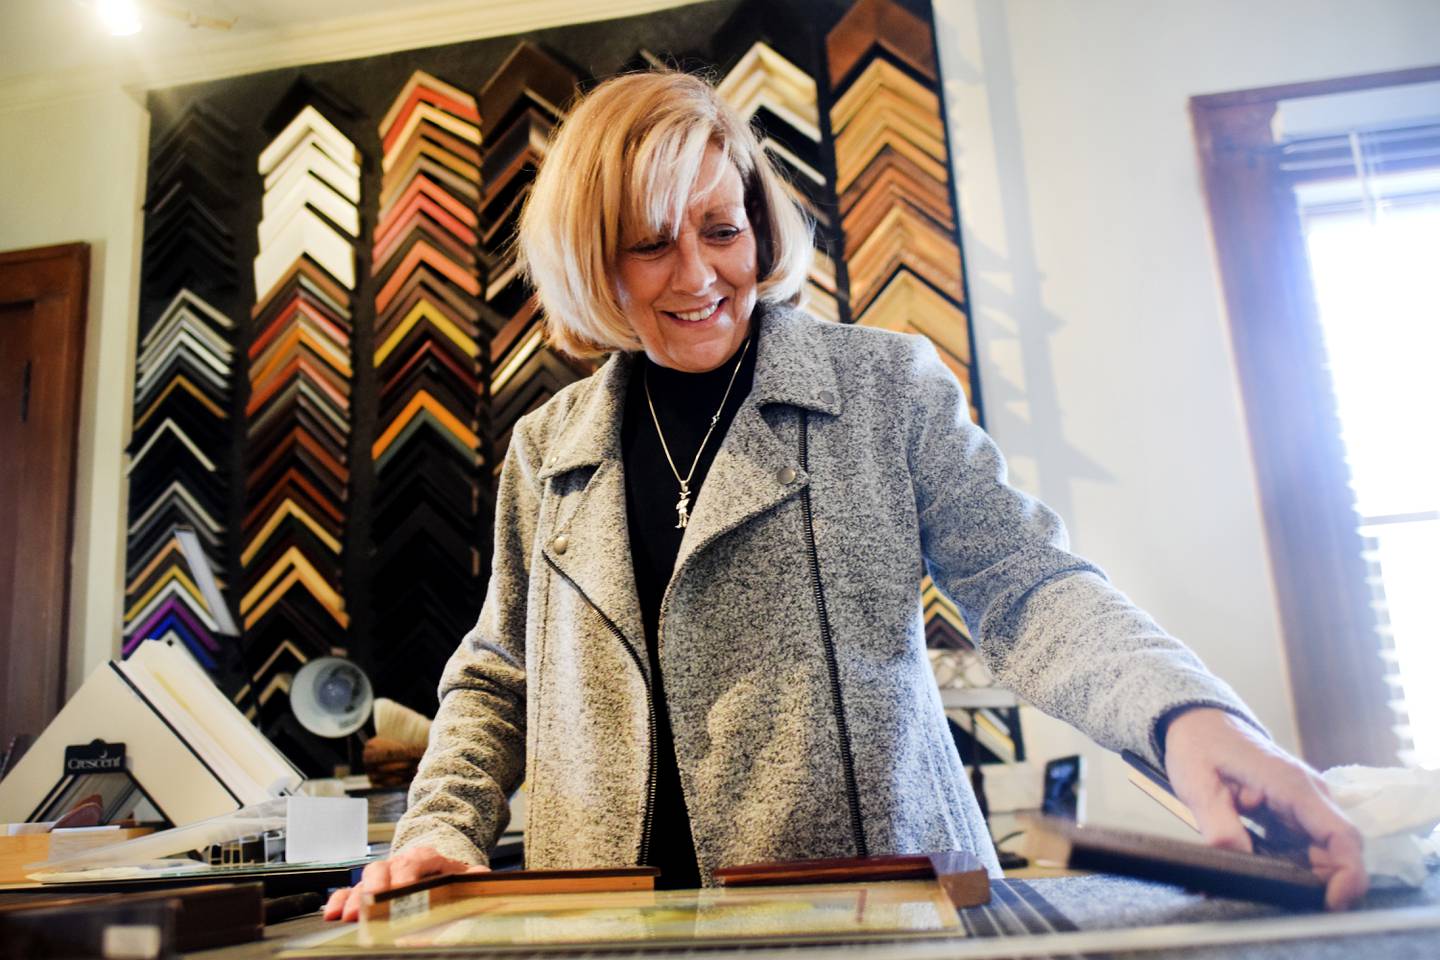 Pauli Zmolek Eades, owner of Cardinal Frame Shop, works on a frame The shop opened for business this past week to appointments, but it also welcomes walk-in traffic.